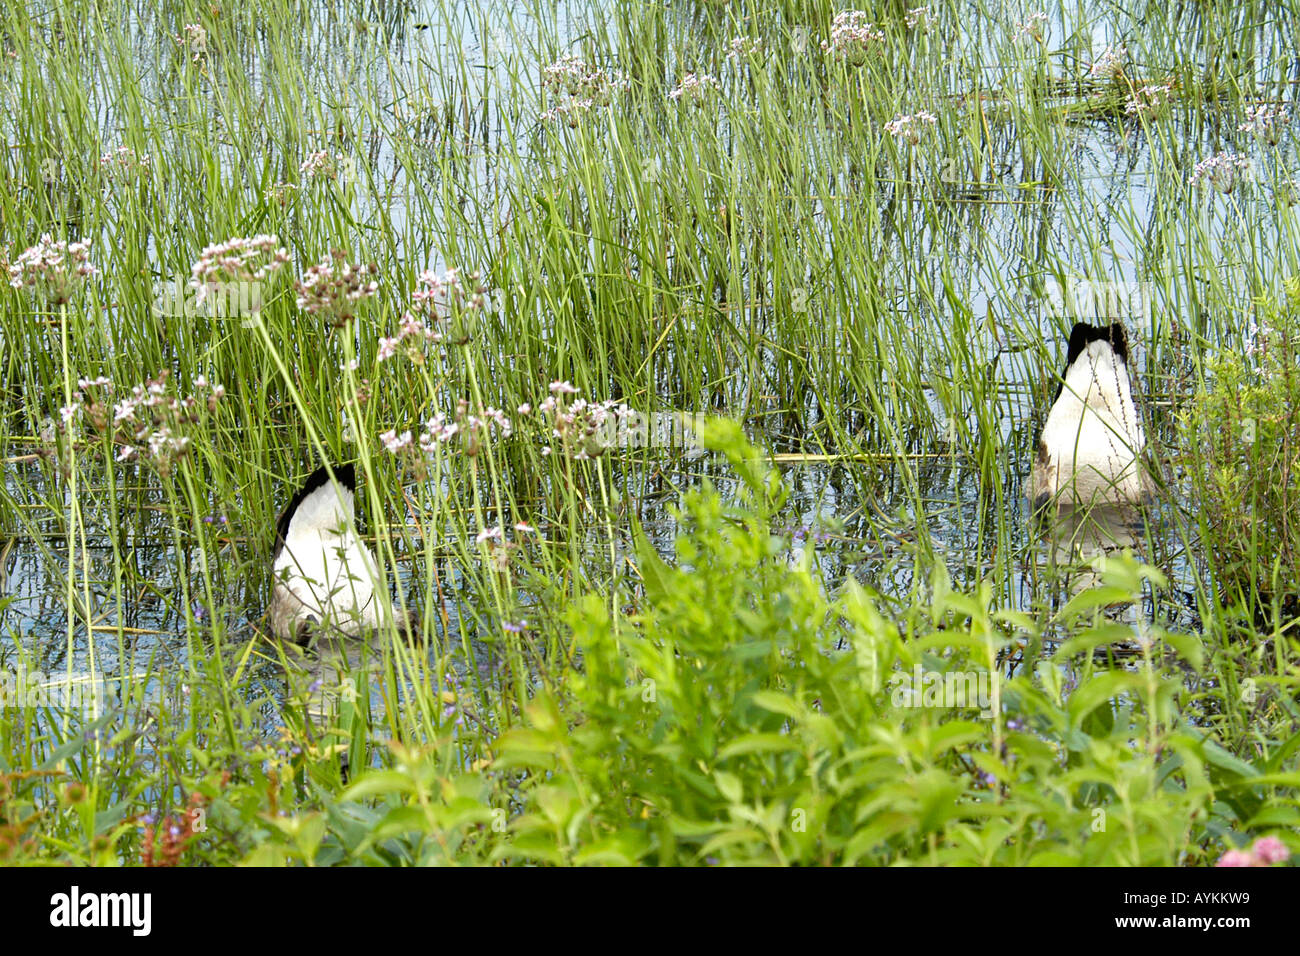 Canadian Geese at a wildlife refuge in the USA Stock Photo